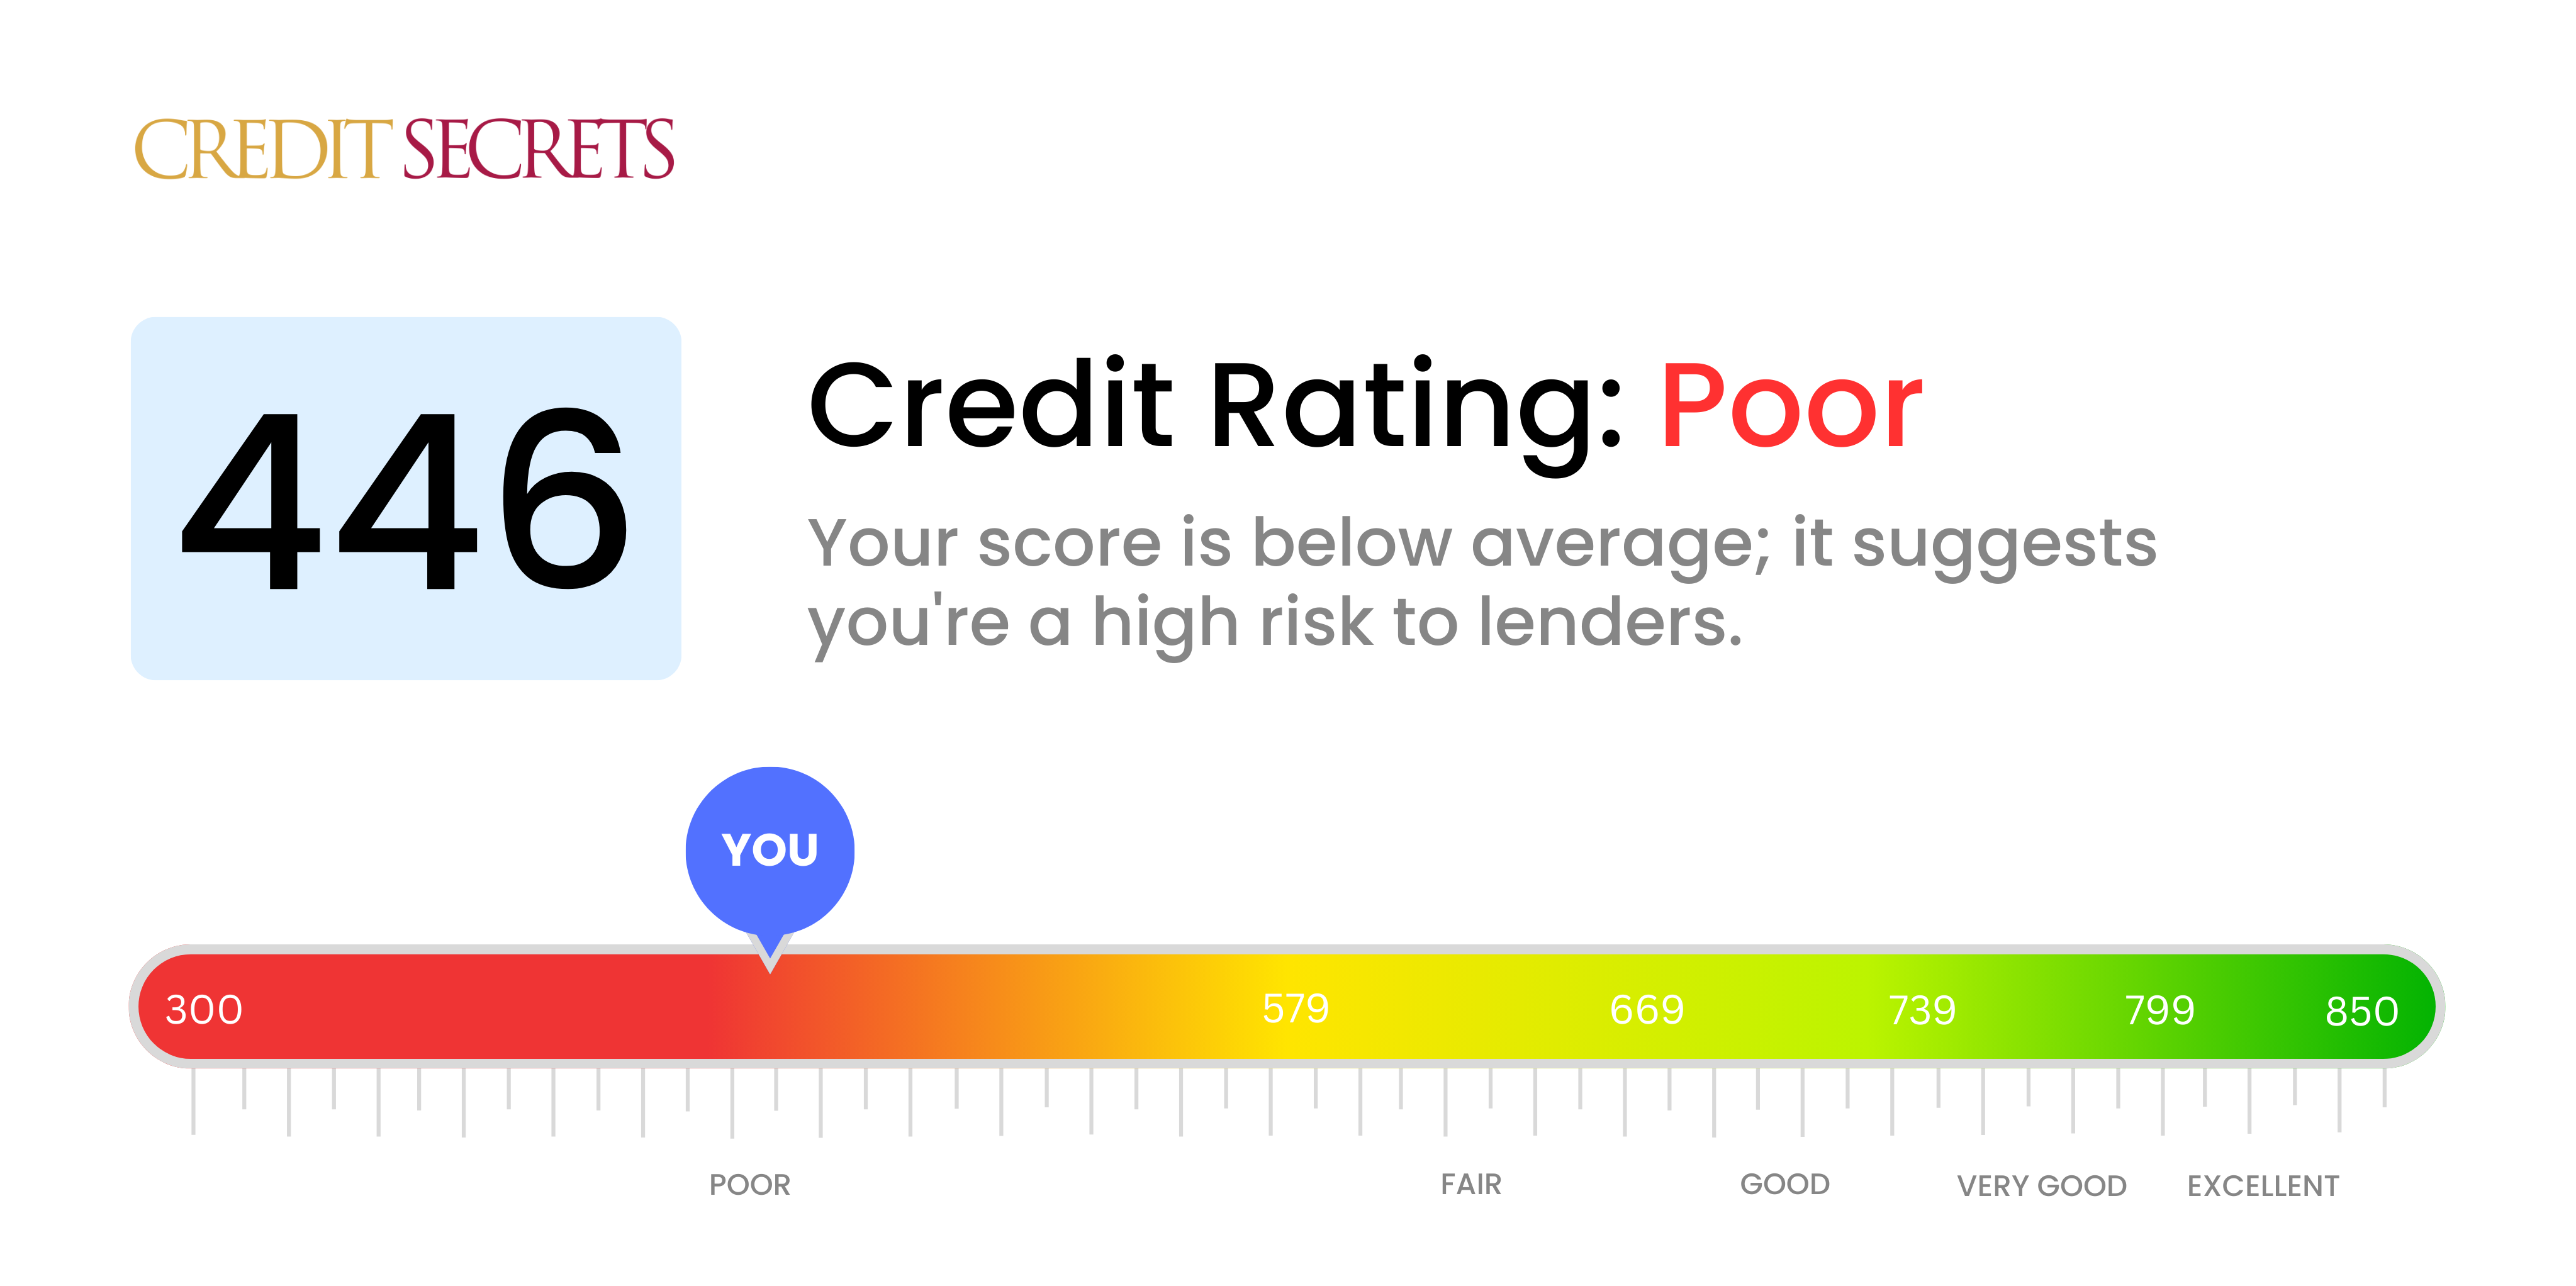 Is 446 a good credit score?